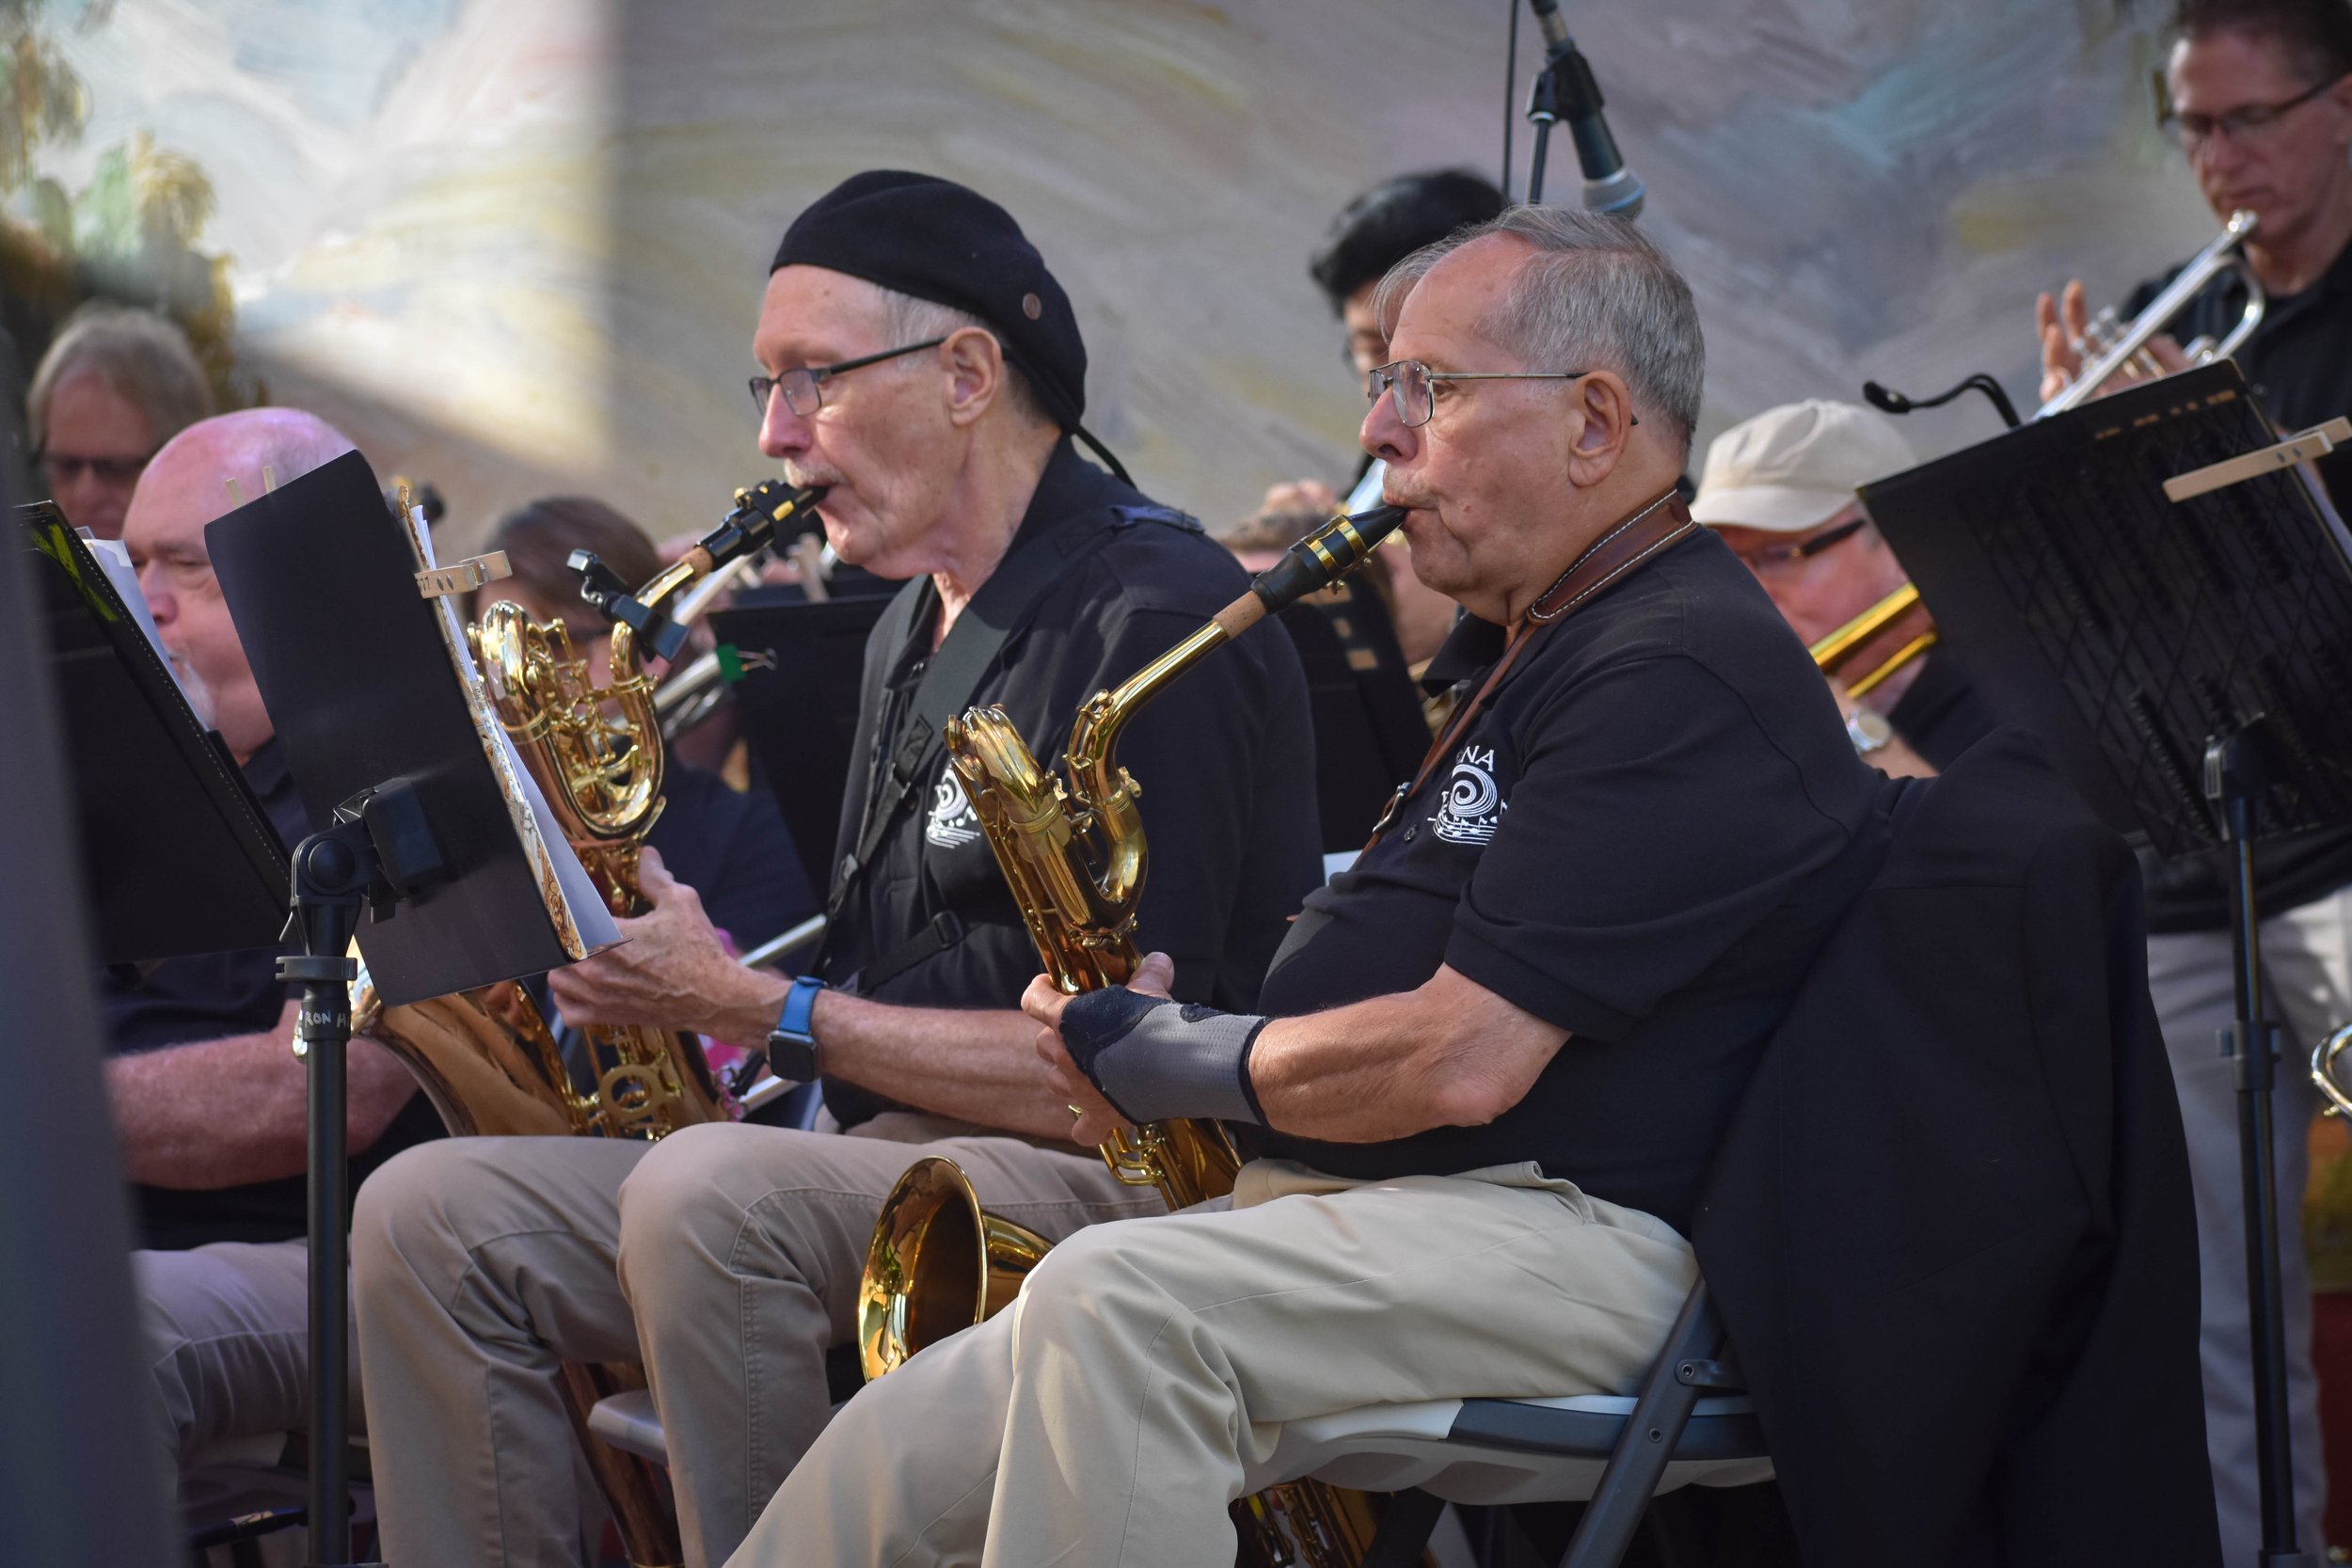 07-10-2023 Laguna Jazz Band concert at Pageant of the Masters by Peyton Webster25-27.jpg